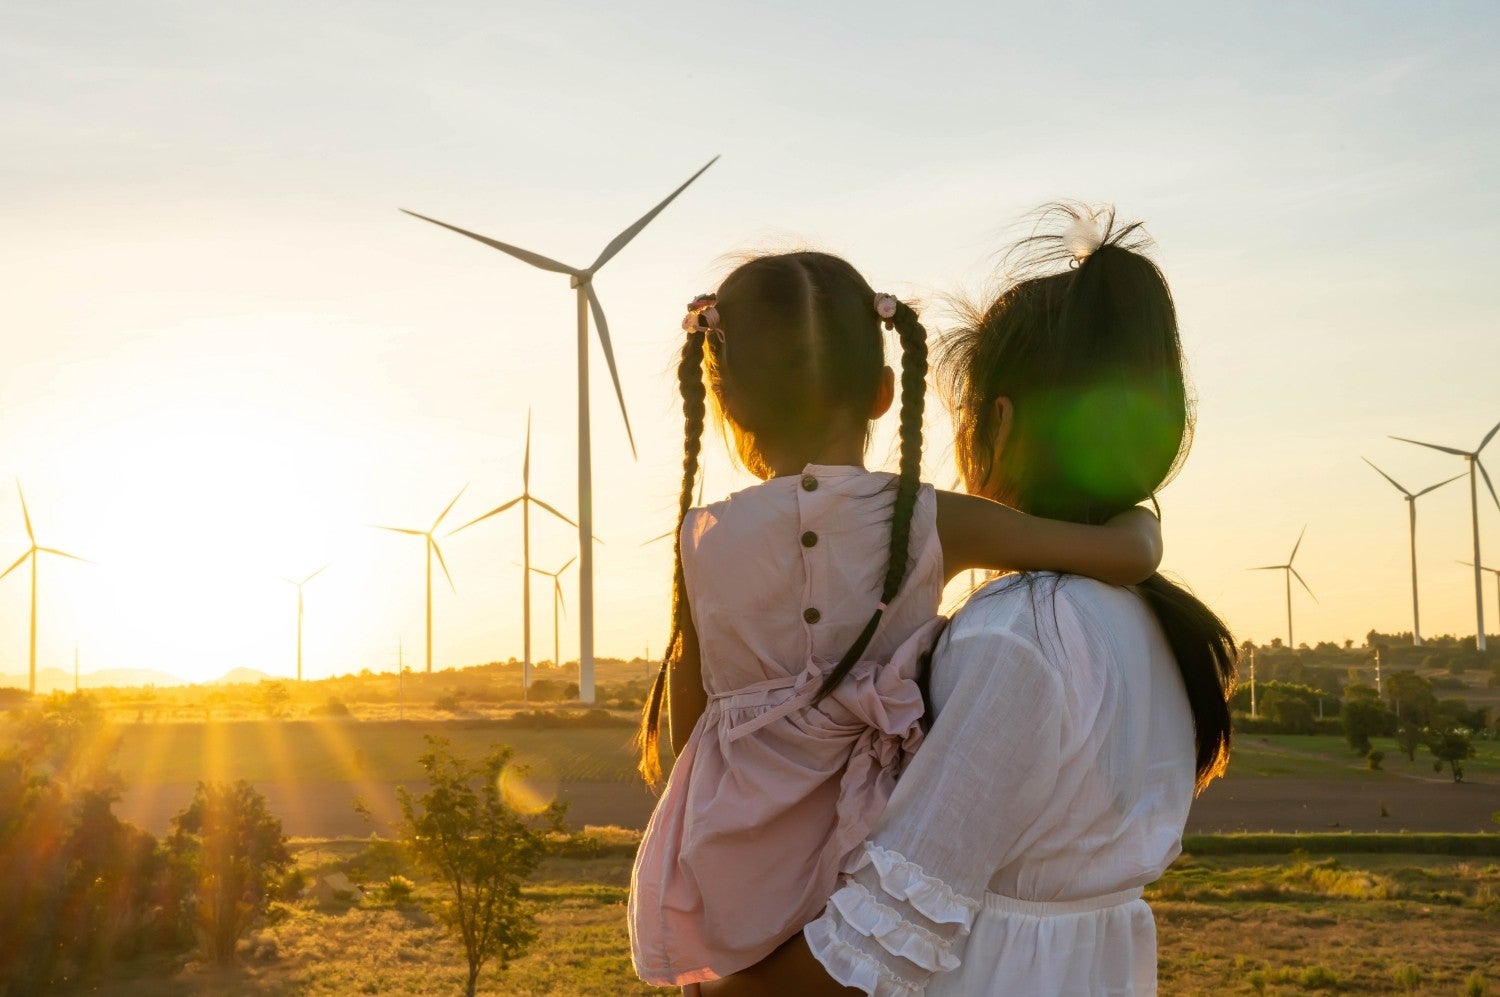 Mother and daughter looking at the sunset over a windmill farm